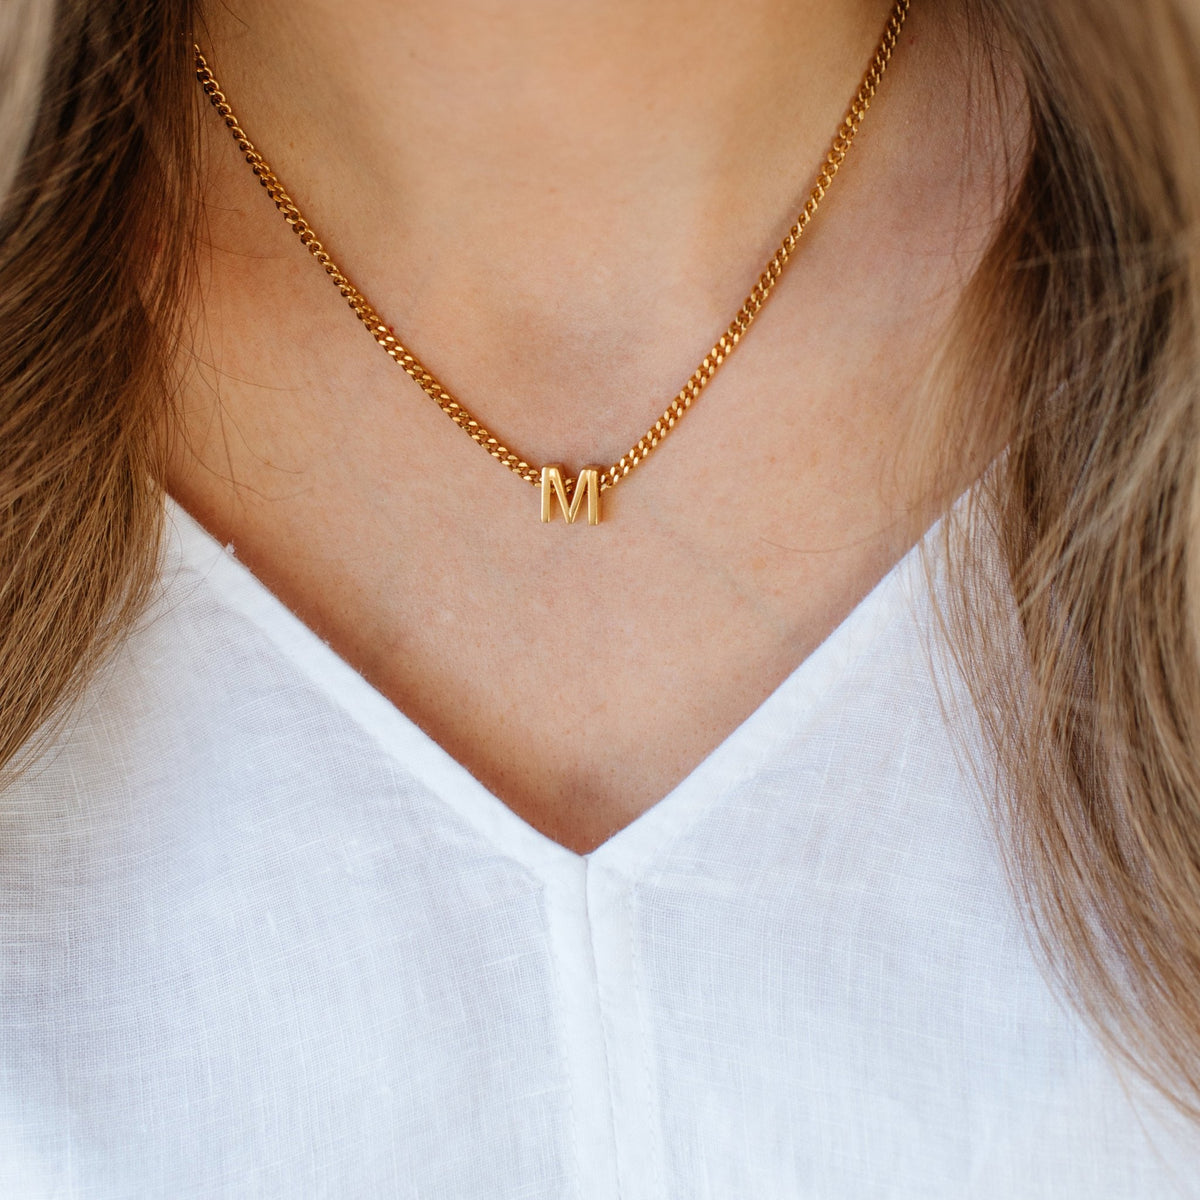 CHARMED INITIAL - M - GOLD OR SILVER - SO PRETTY CARA COTTER